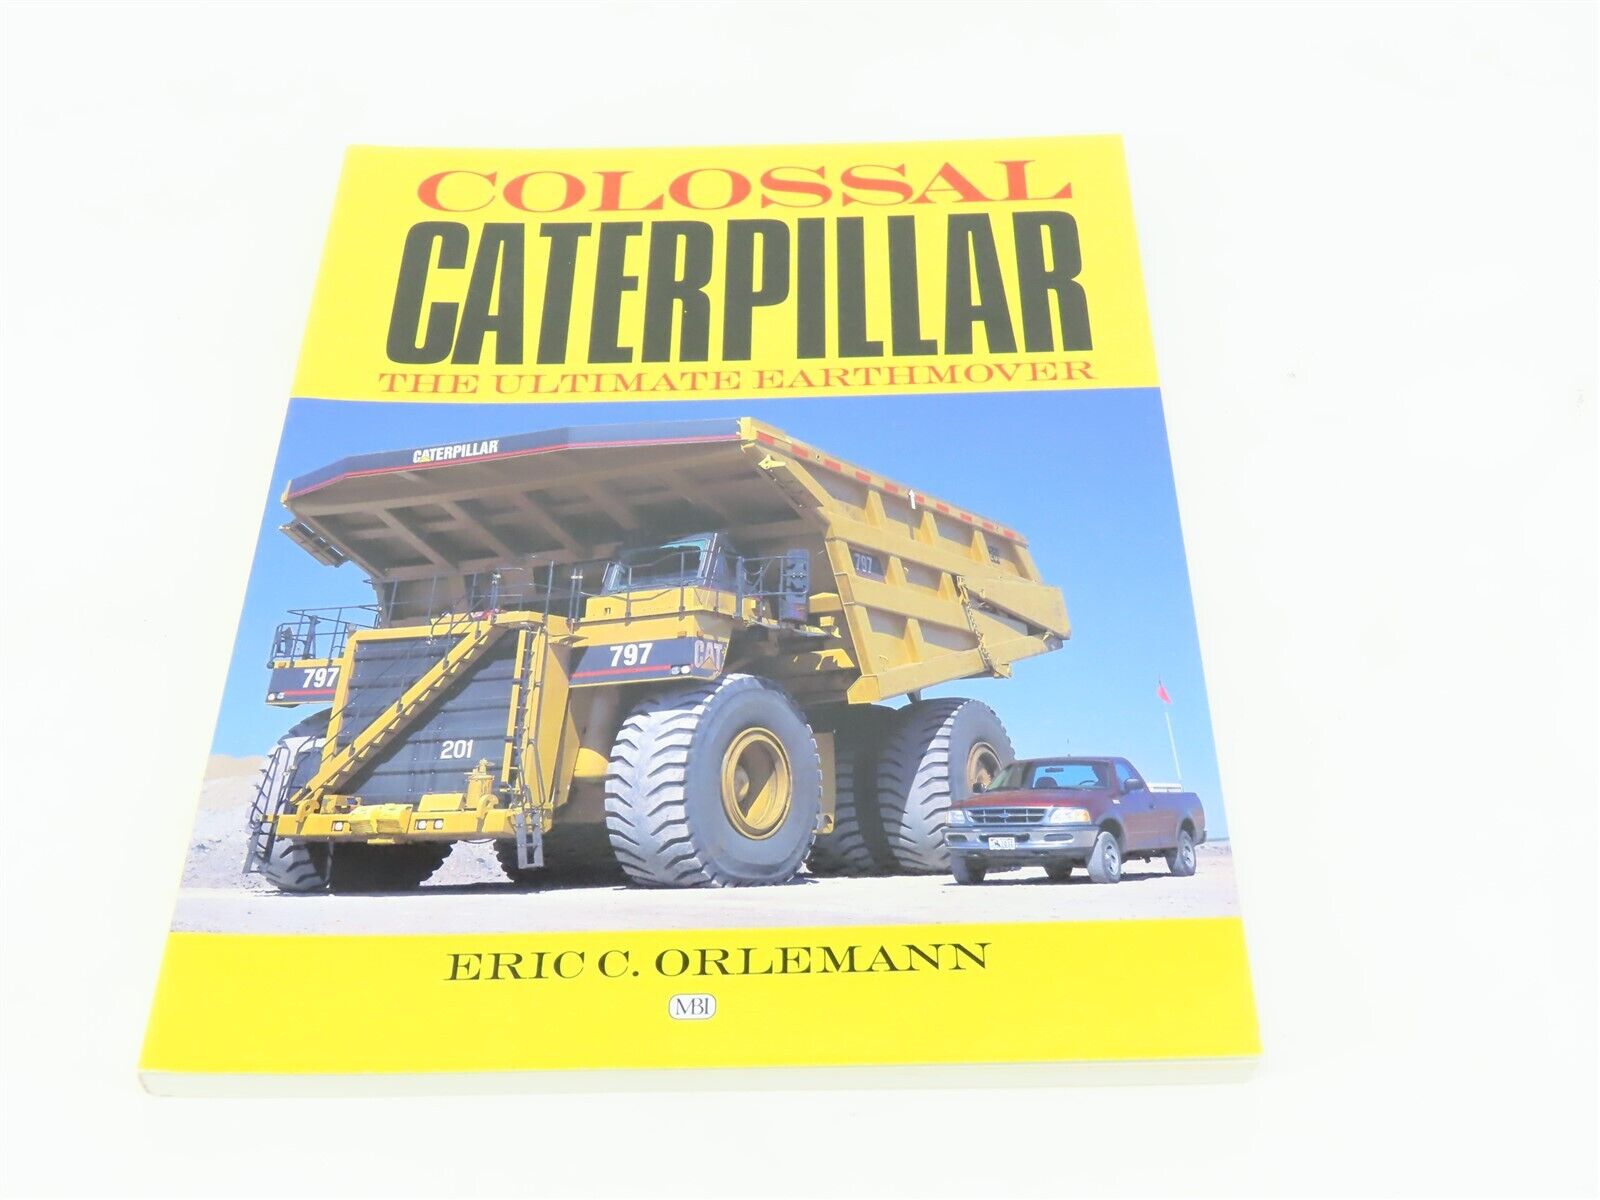 Colossal Caterpillar: The Ultimate Earthmover by Eric C. Orlemann ©2002 SC Book